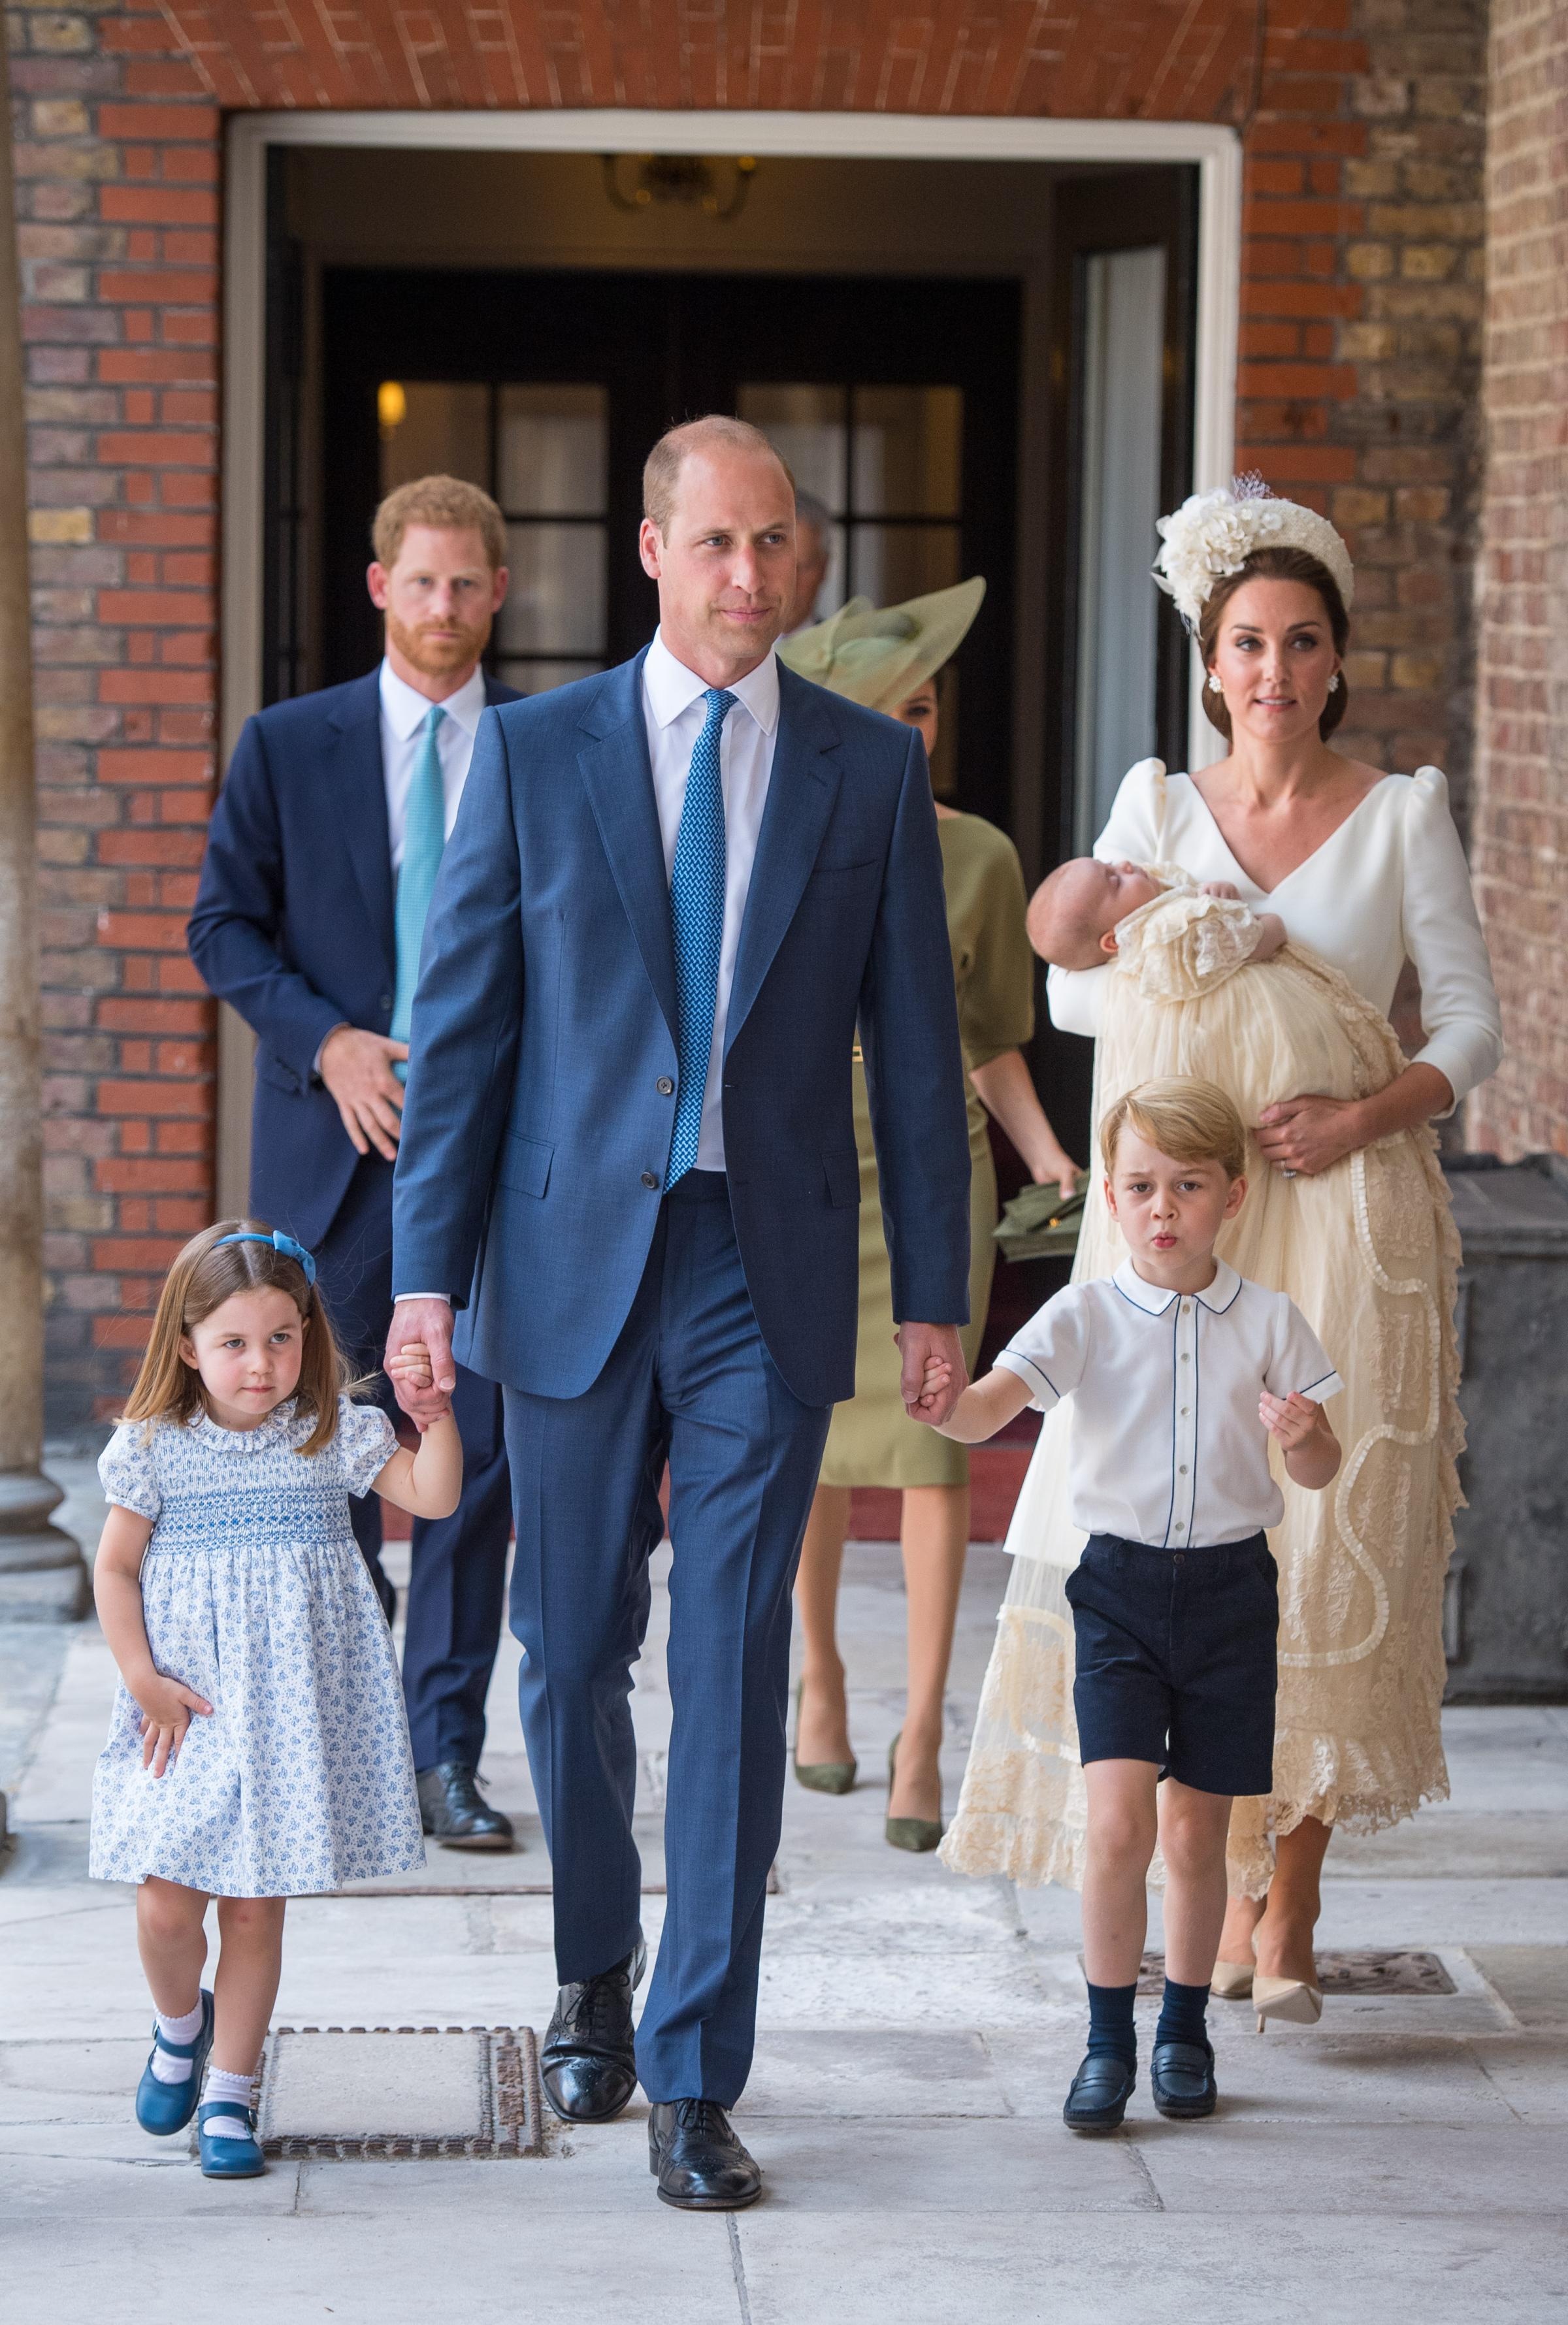 Royal family attends the Christening Of Prince Louis Of Cambridge At St James's Palace